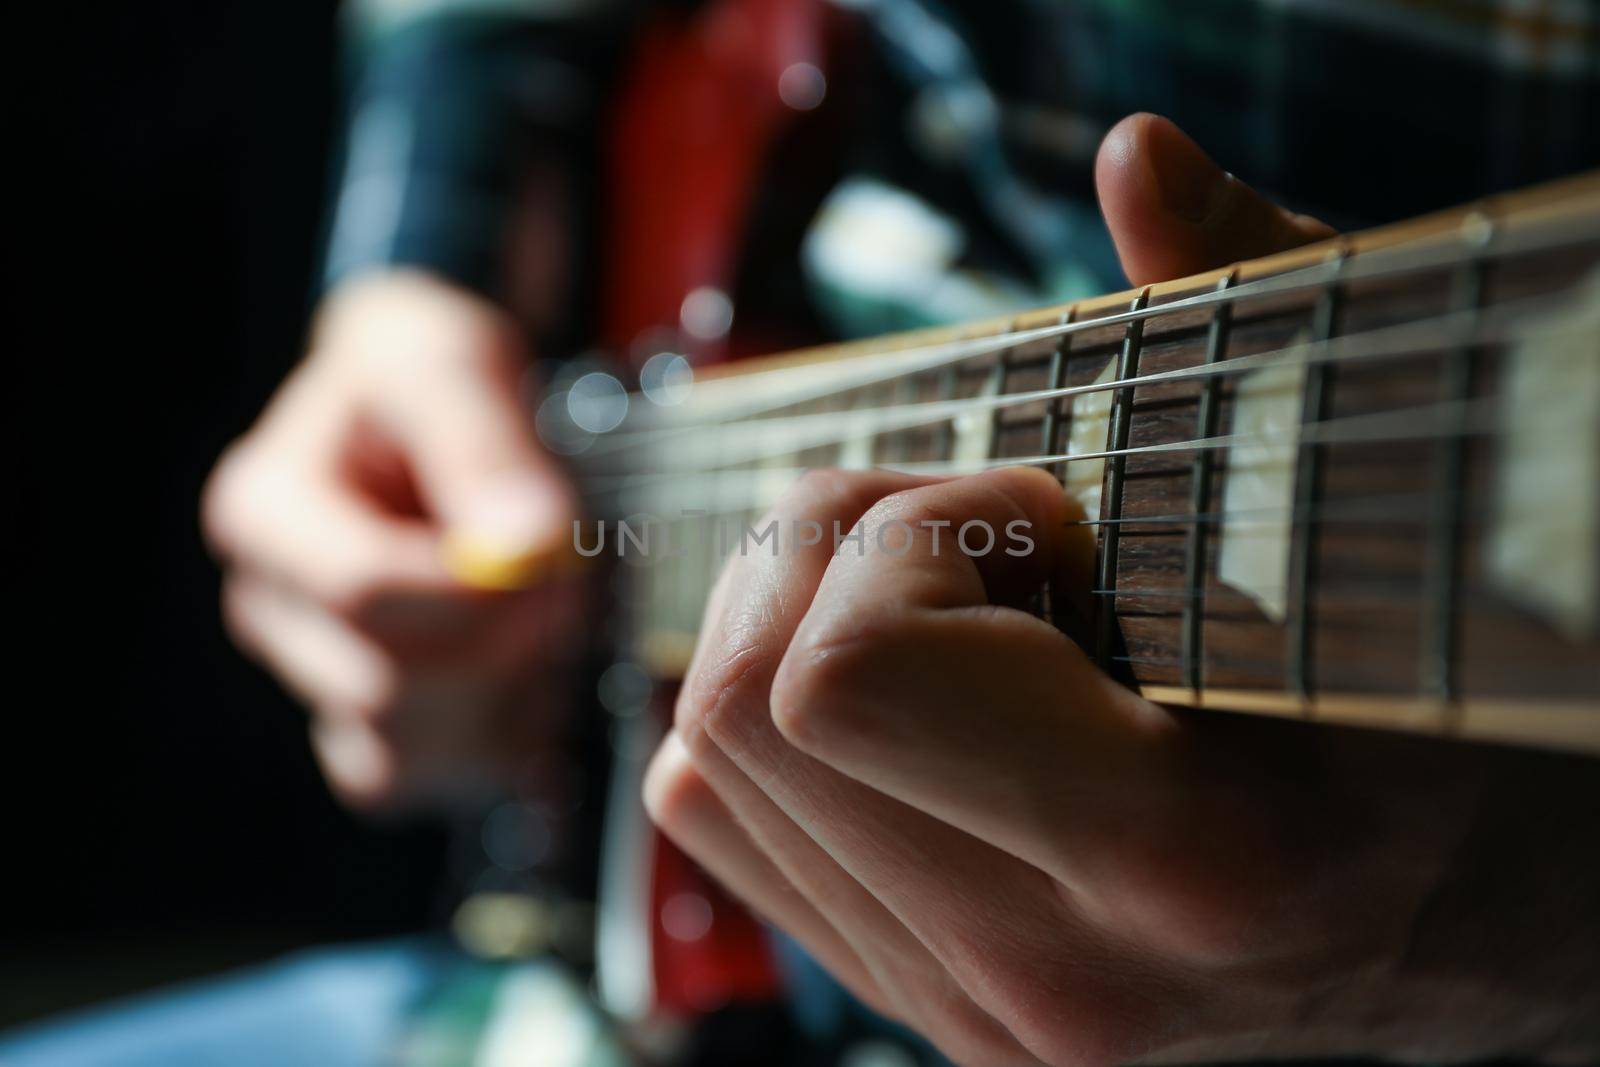 Man playing on electric guitar against dark background, closeup